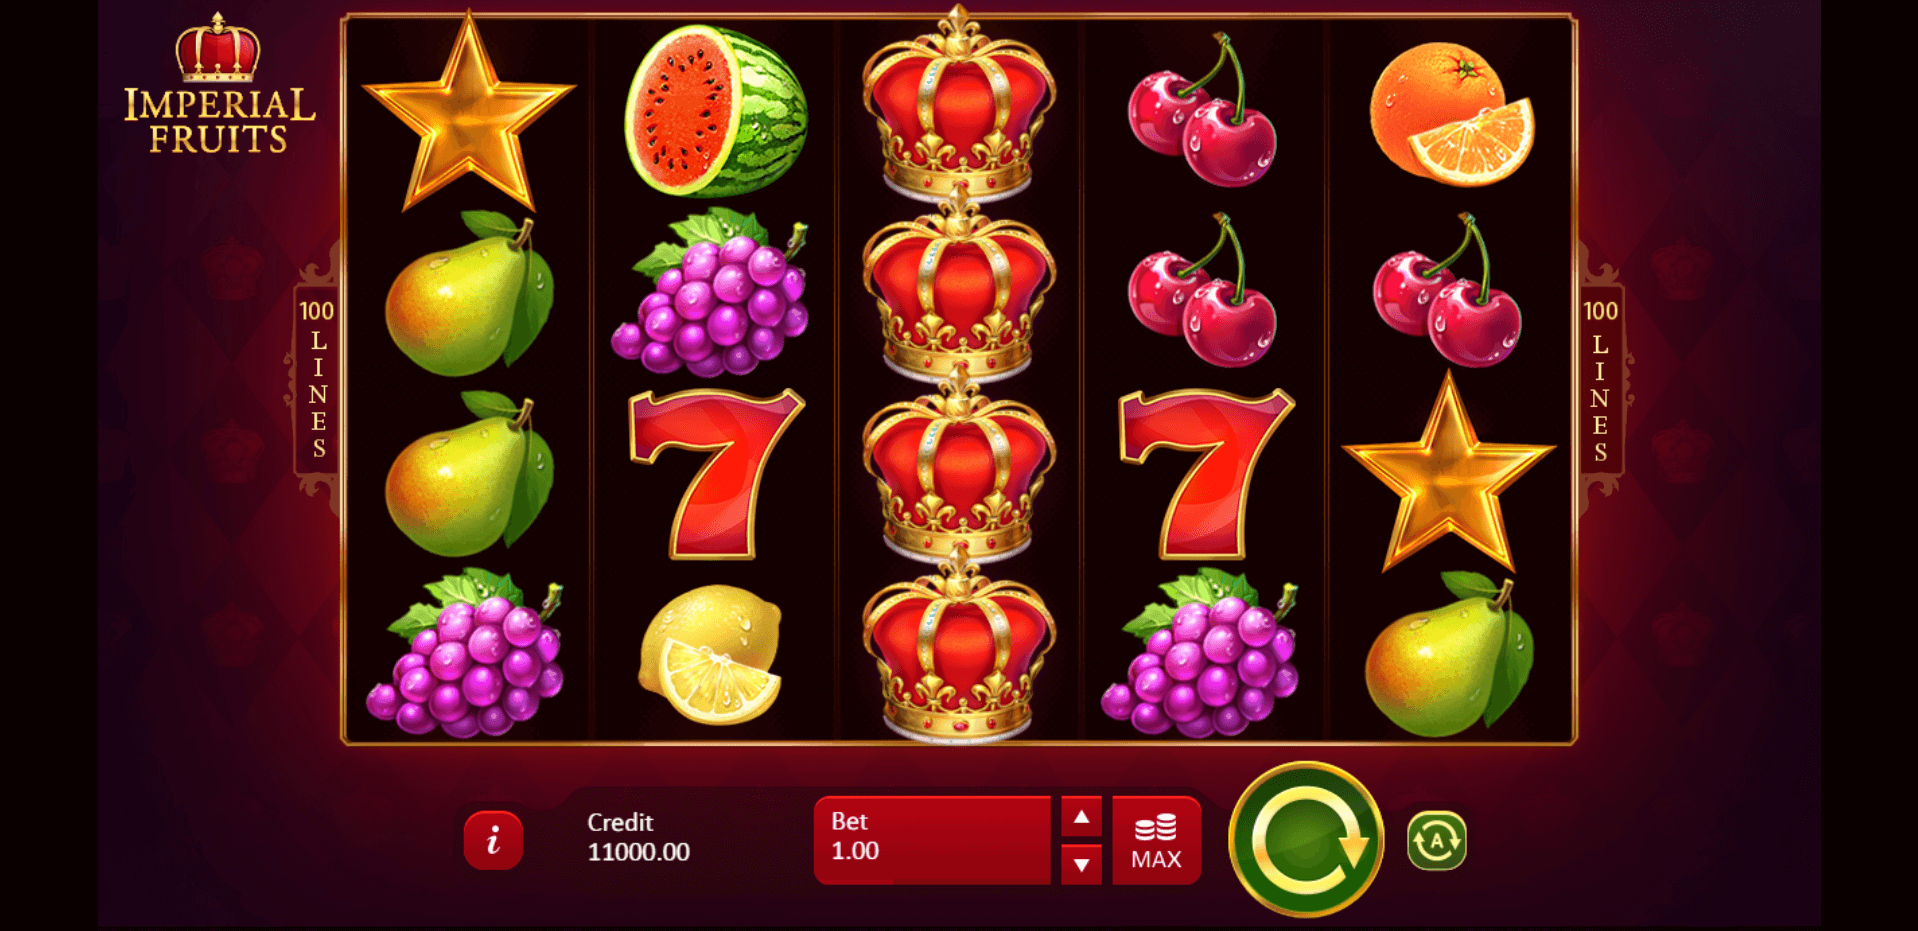 Imperial Fruits 100 Lines slot play free